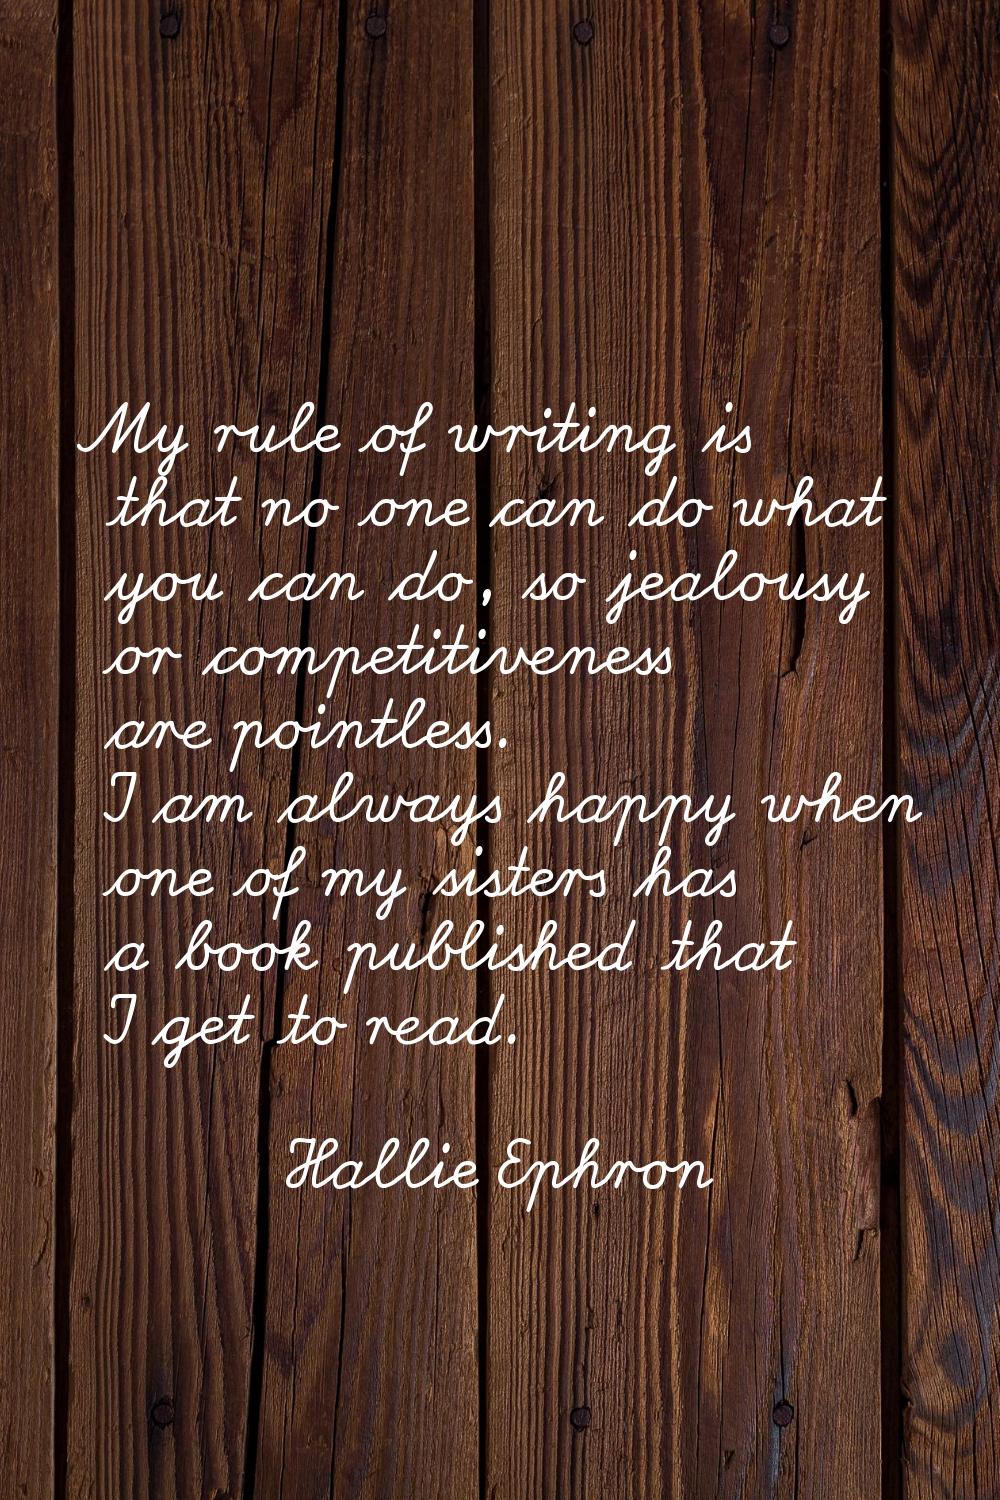 My rule of writing is that no one can do what you can do, so jealousy or competitiveness are pointl